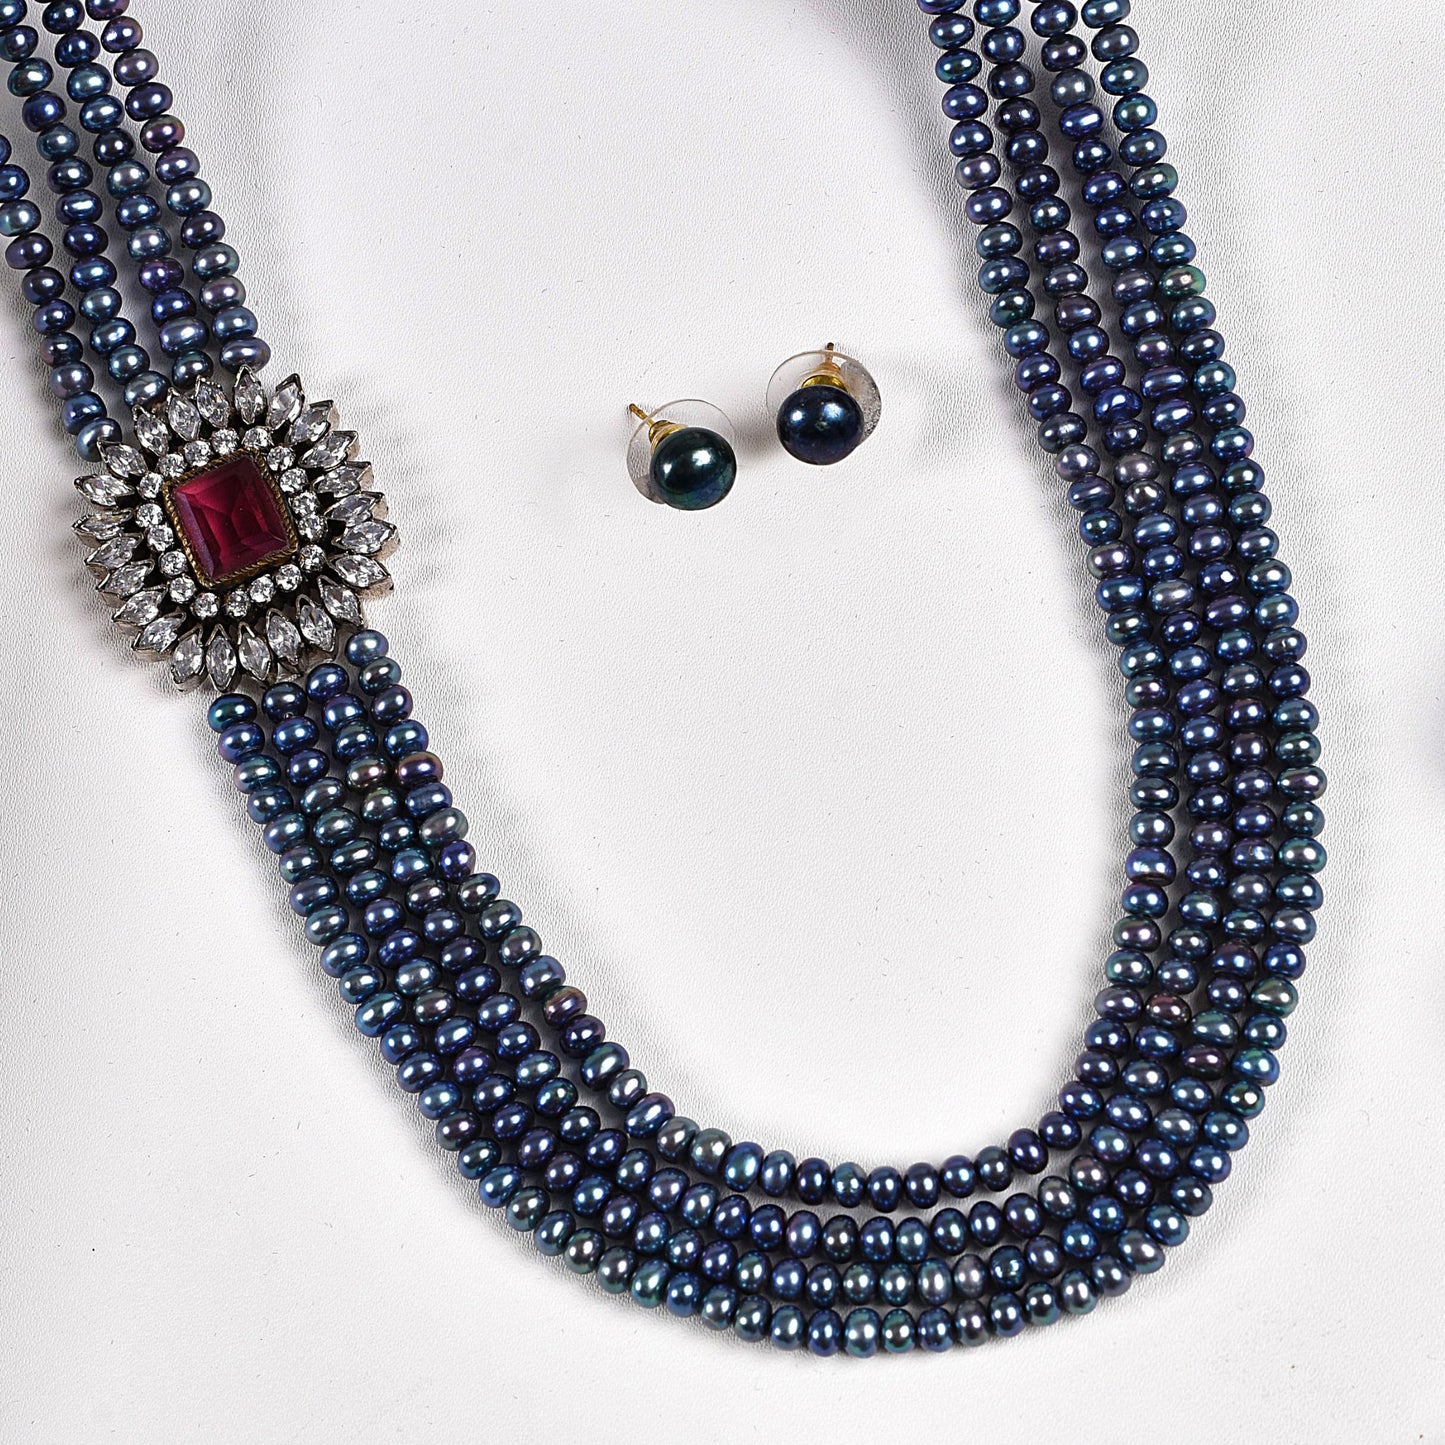 Peacock Beads- Midnight Blue Pearl Necklace with side Sodalite Broach